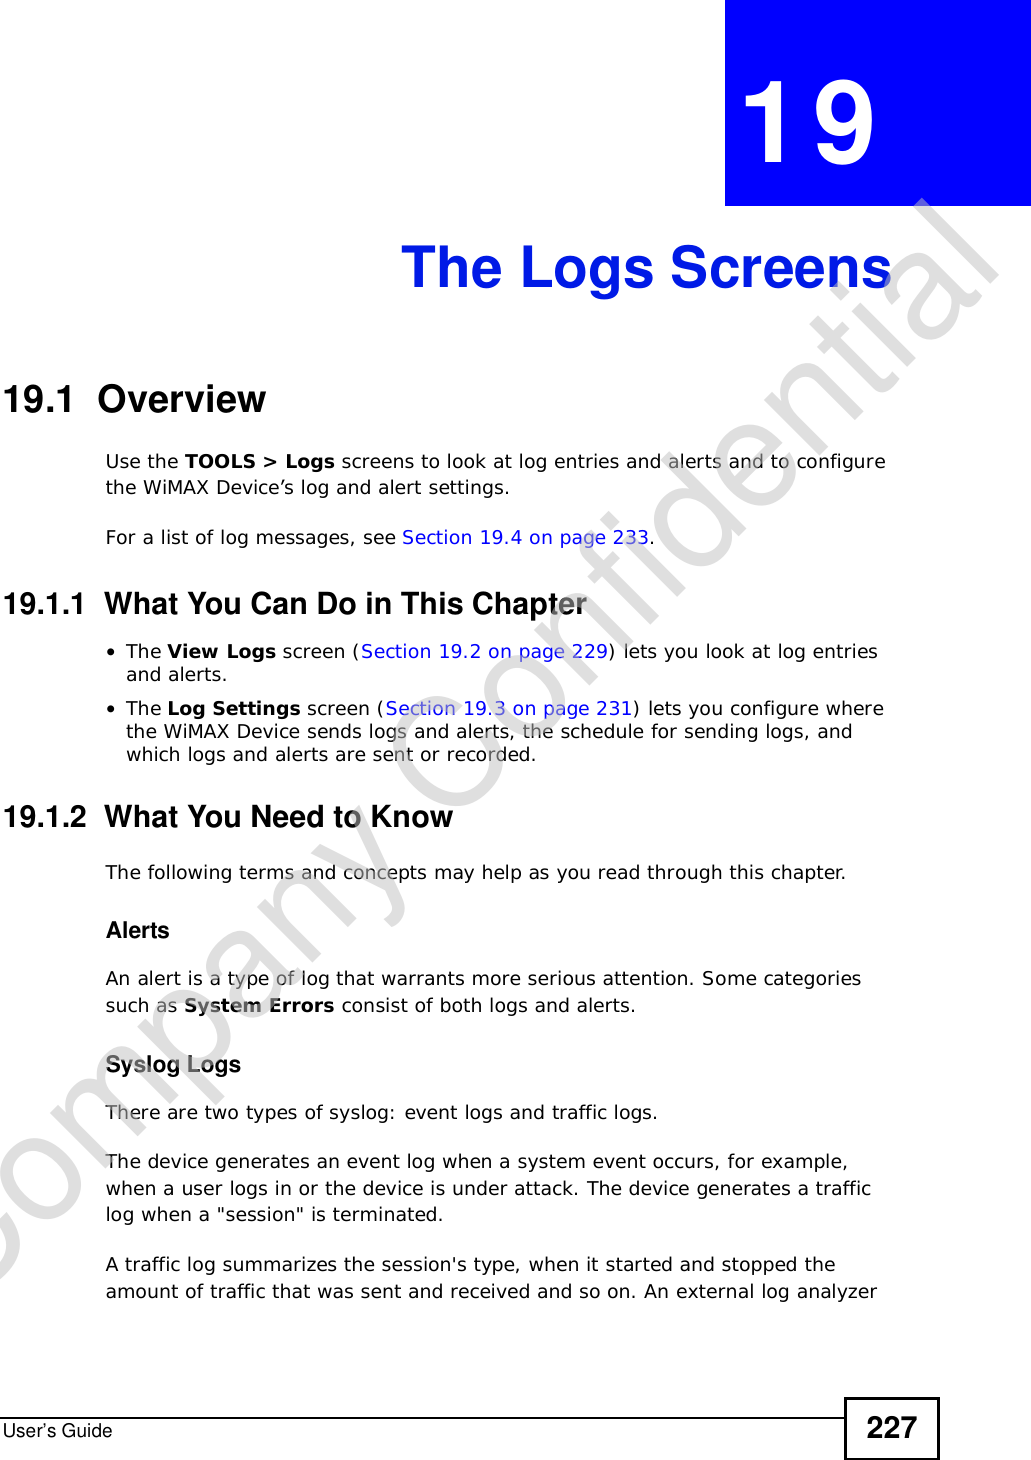 User’s Guide 227CHAPTER 19The Logs Screens19.1  OverviewUse the TOOLS &gt; Logs screens to look at log entries and alerts and to configure the WiMAX Device’s log and alert settings.For a list of log messages, see Section 19.4 on page 233.19.1.1  What You Can Do in This Chapter•The View Logs screen (Section 19.2 on page 229) lets you look at log entries and alerts.•The Log Settings screen (Section 19.3 on page 231) lets you configure where the WiMAX Device sends logs and alerts, the schedule for sending logs, and which logs and alerts are sent or recorded.19.1.2  What You Need to KnowThe following terms and concepts may help as you read through this chapter.AlertsAn alert is a type of log that warrants more serious attention. Some categories such as System Errors consist of both logs and alerts.Syslog LogsThere are two types of syslog: event logs and traffic logs. The device generates an event log when a system event occurs, for example, when a user logs in or the device is under attack. The device generates a traffic log when a &quot;session&quot; is terminated. A traffic log summarizes the session&apos;s type, when it started and stopped the amount of traffic that was sent and received and so on. An external log analyzer Company Confidential